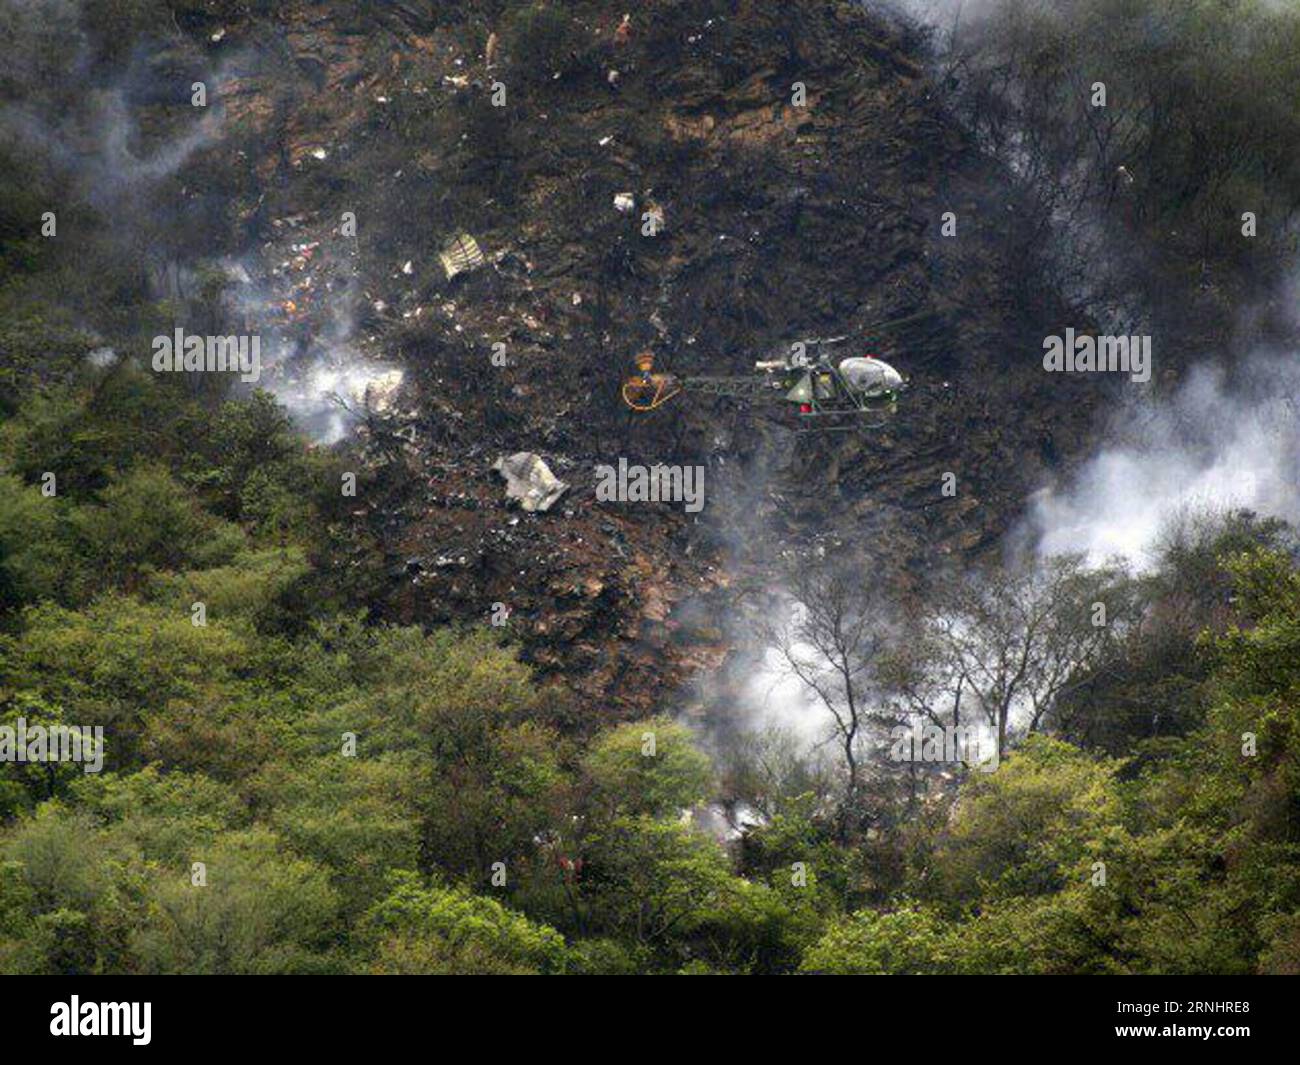 Pakistanisches Passagierflugzeug abgestürzt (161207) -- HAVELIAN(PAKISTAN), Dec. 7, 2016 -- Photo taken on Dec. 7, 2016, shows a helicopter flying over the site of a plane crash in northwest Pakistan s Havelian. A passenger plane of Pakistan International Airlines (PIA) with 47 people onboard crashed in the country s northwest Havelian area on Wednesday, officials said. ) (sxk) PAKISTAN-HAVELIAN-PLANE CRASH Stringer PUBLICATIONxNOTxINxCHN   Pakistani Passenger aircraft crashed   Pakistan DEC 7 2016 Photo Taken ON DEC 7 2016 Shows a Helicopter Flying Over The Site of a Plane Crash in Northwest Stock Photo